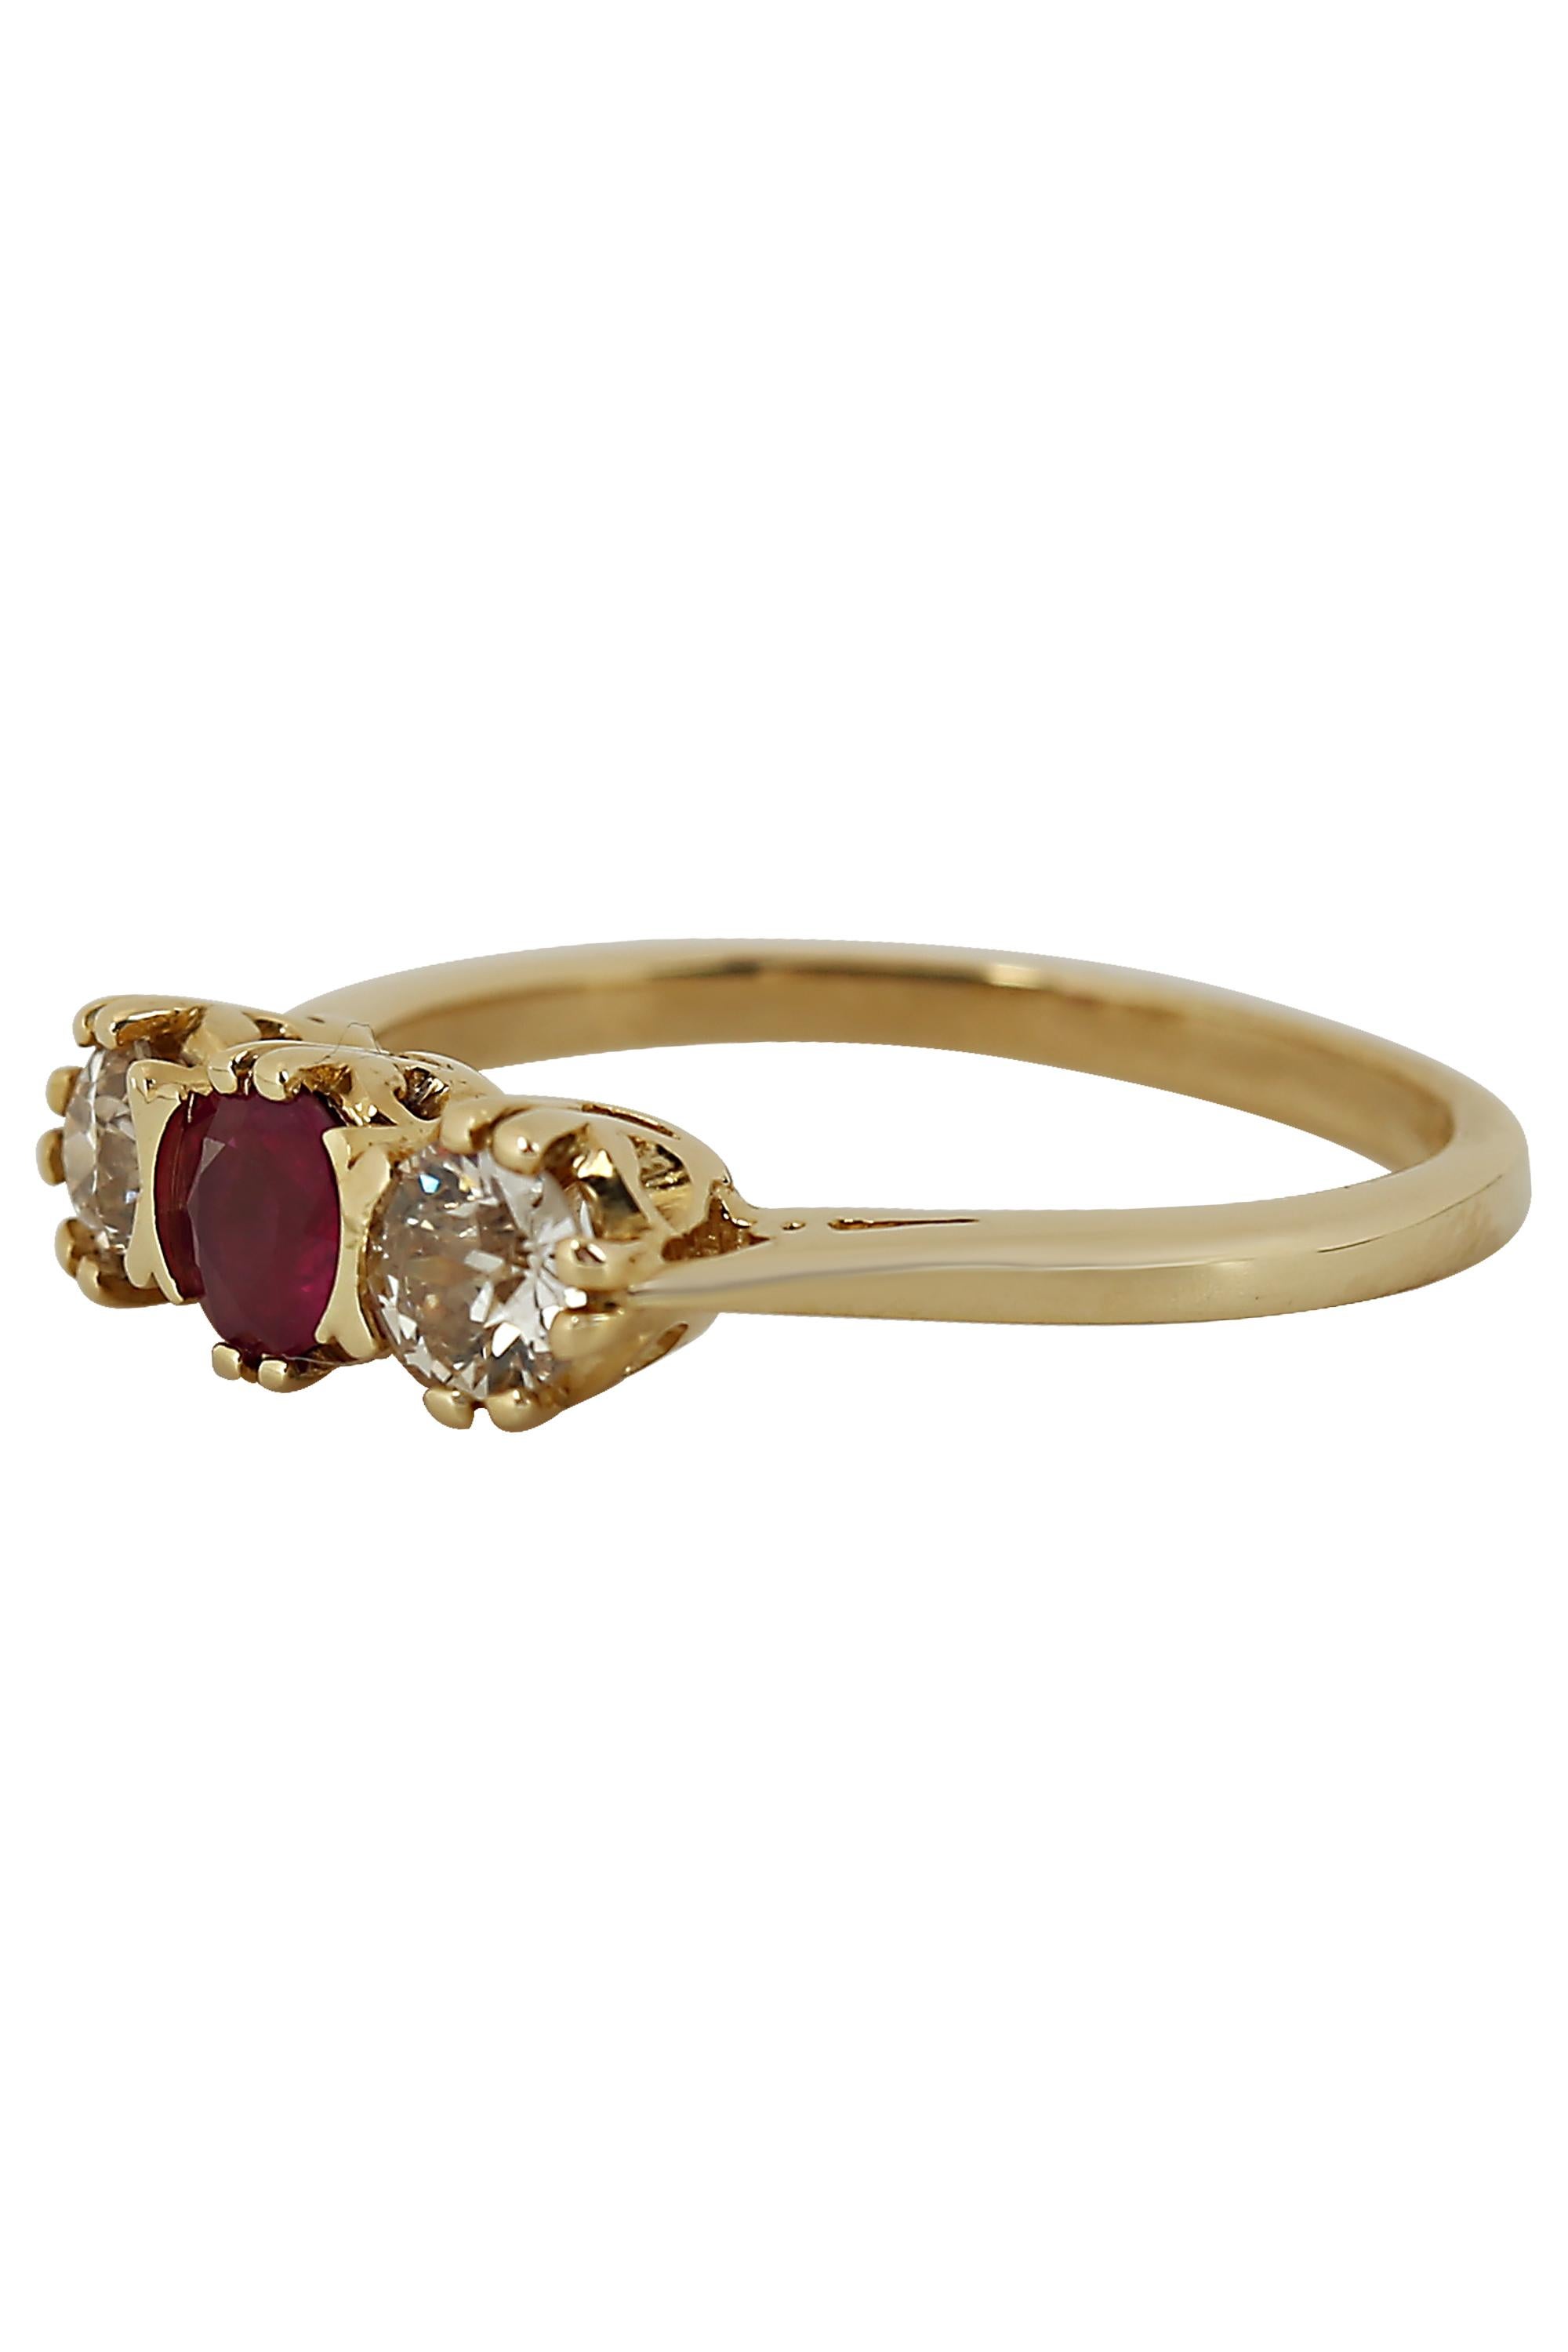 A tailored three stone ring featuring a center ruby weighing approximately 0.35 carat illuminated by two European cut diamonds weighing approximately 0.40 carat total mounted in 14 karat yellow gold. Current size 6.75.

